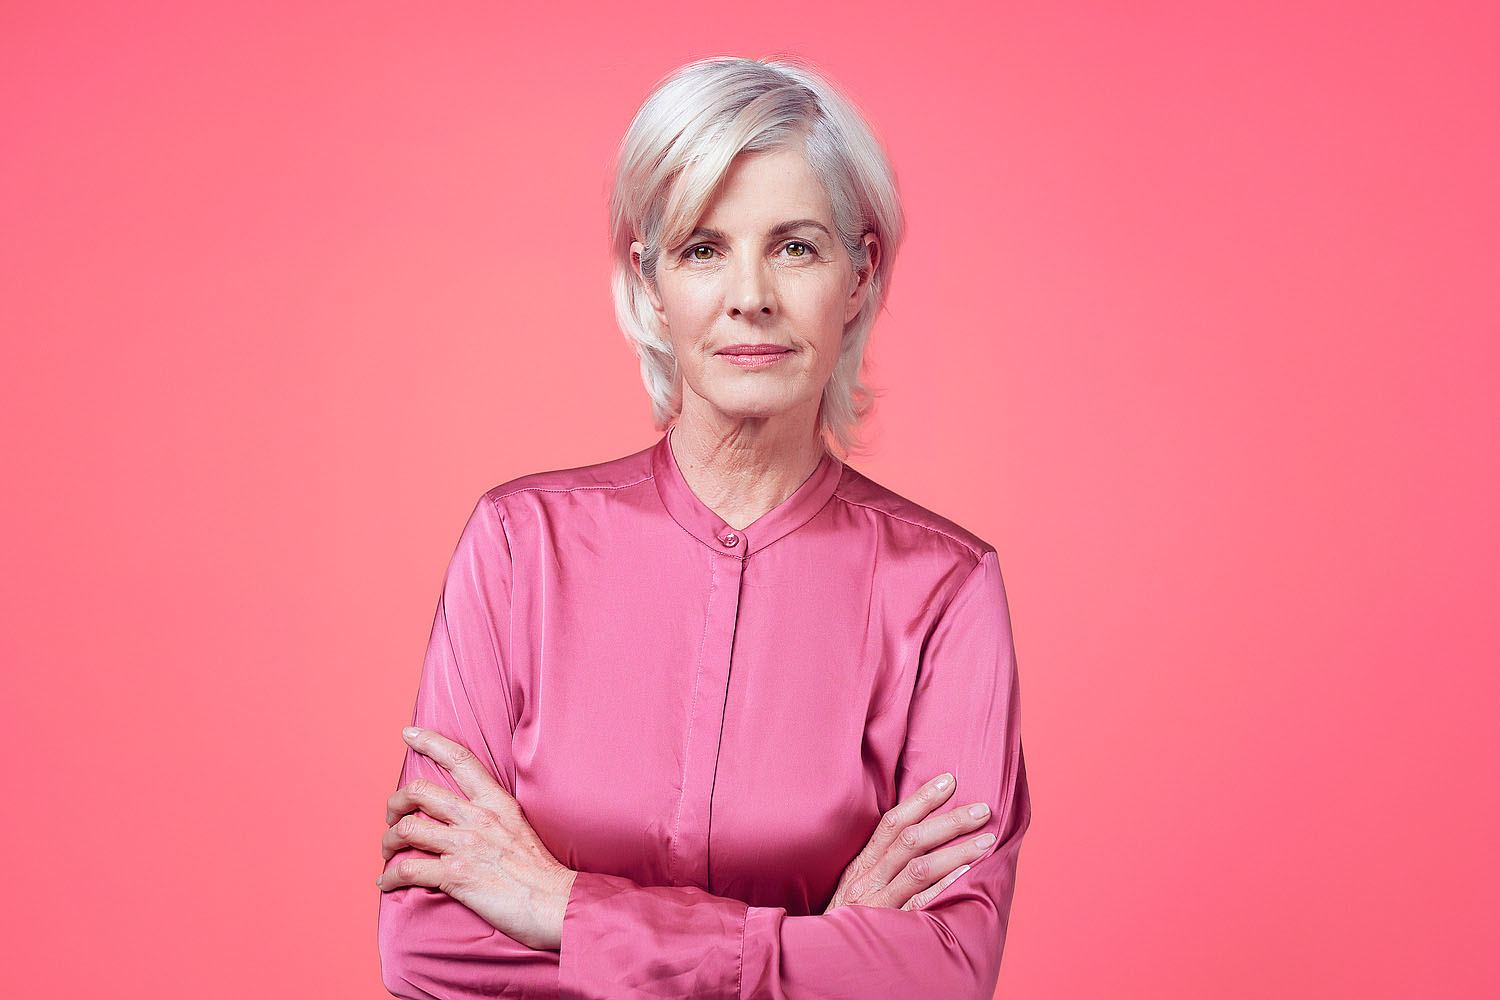 Portrait of a confident elderly woman standing against a pink background inside of a studio